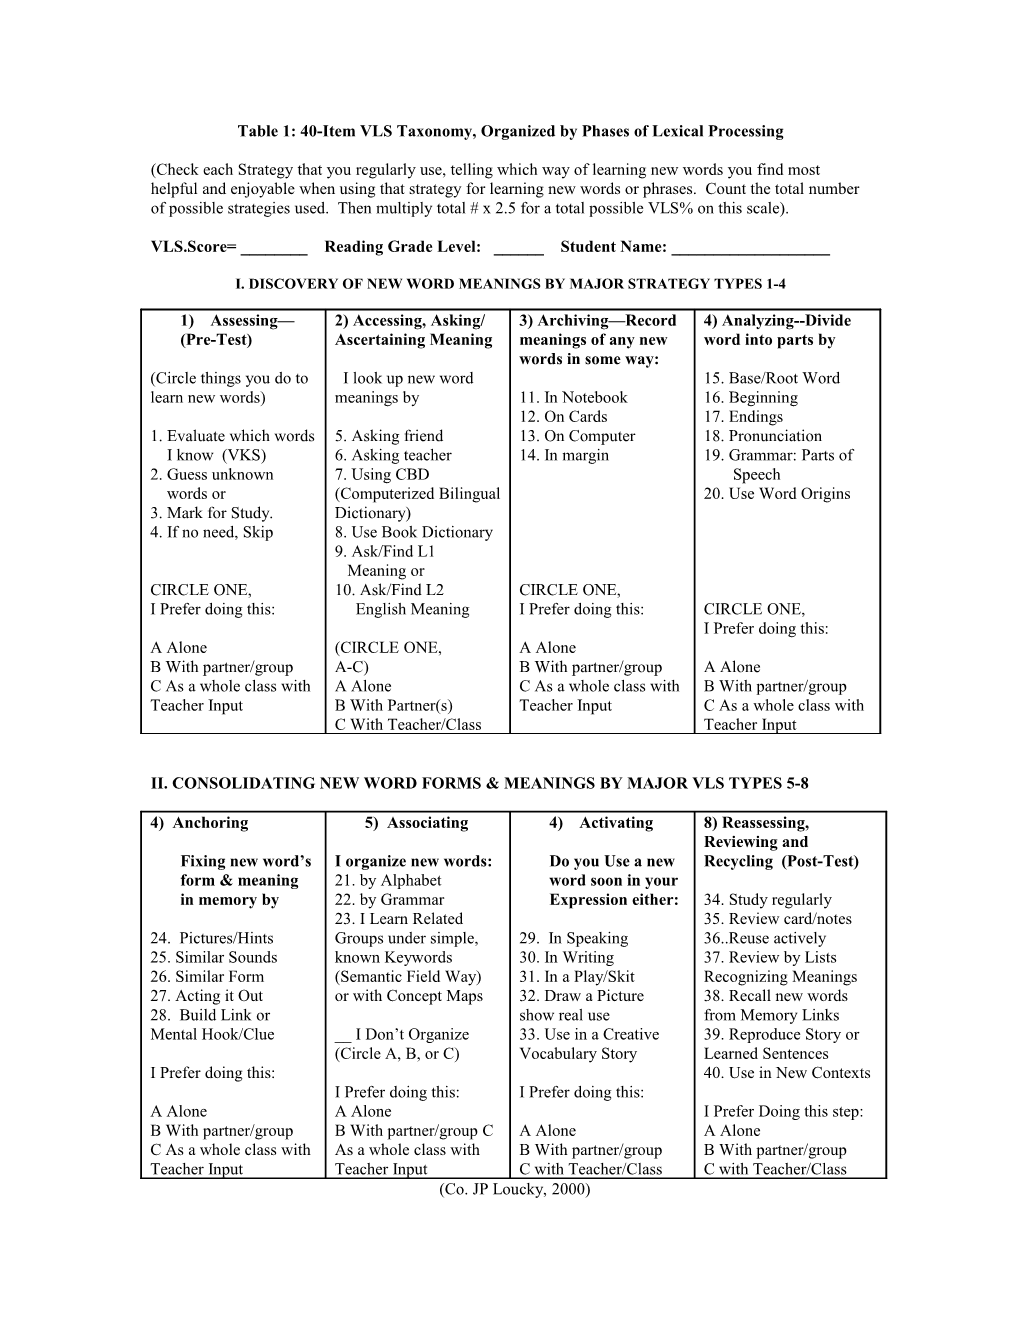 Table 1: 40-Item VLS Taxonomy, Organized by Phases of Lexical Processing